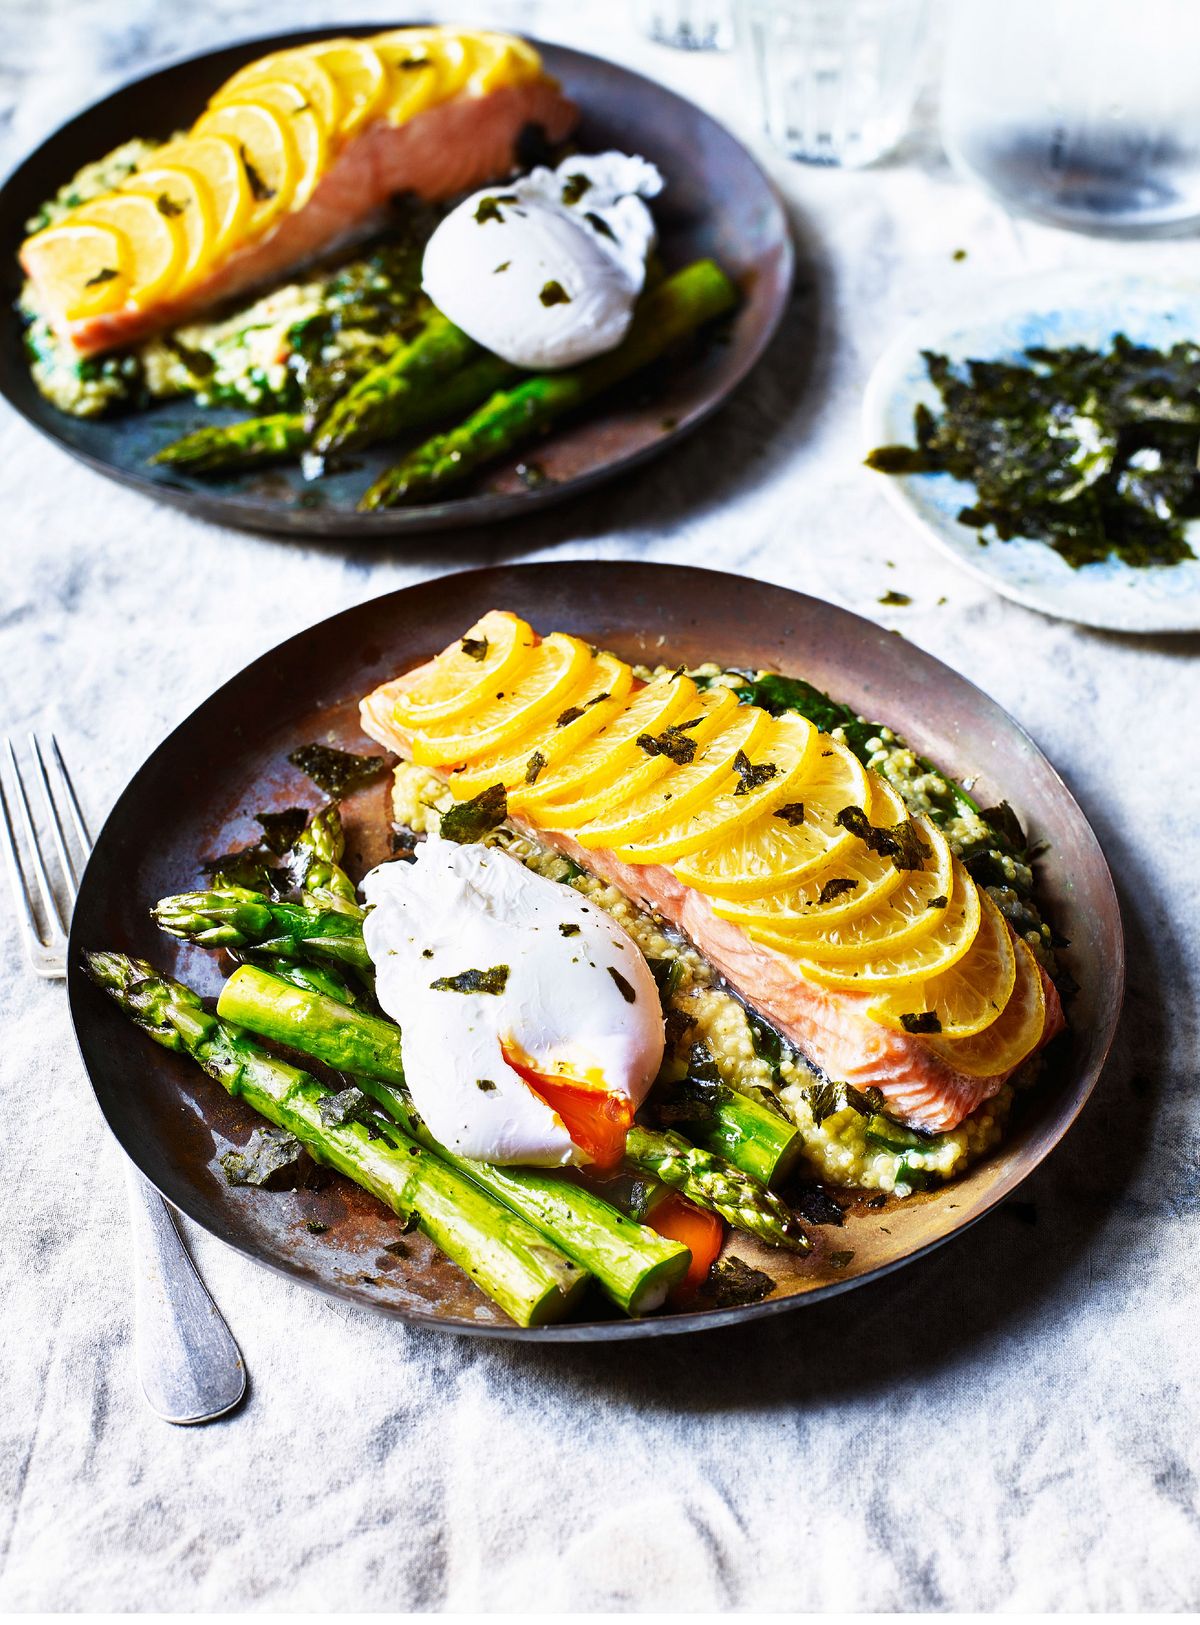 Baked Salmon with Crispy Seaweed, Poached Egg & Asparagus